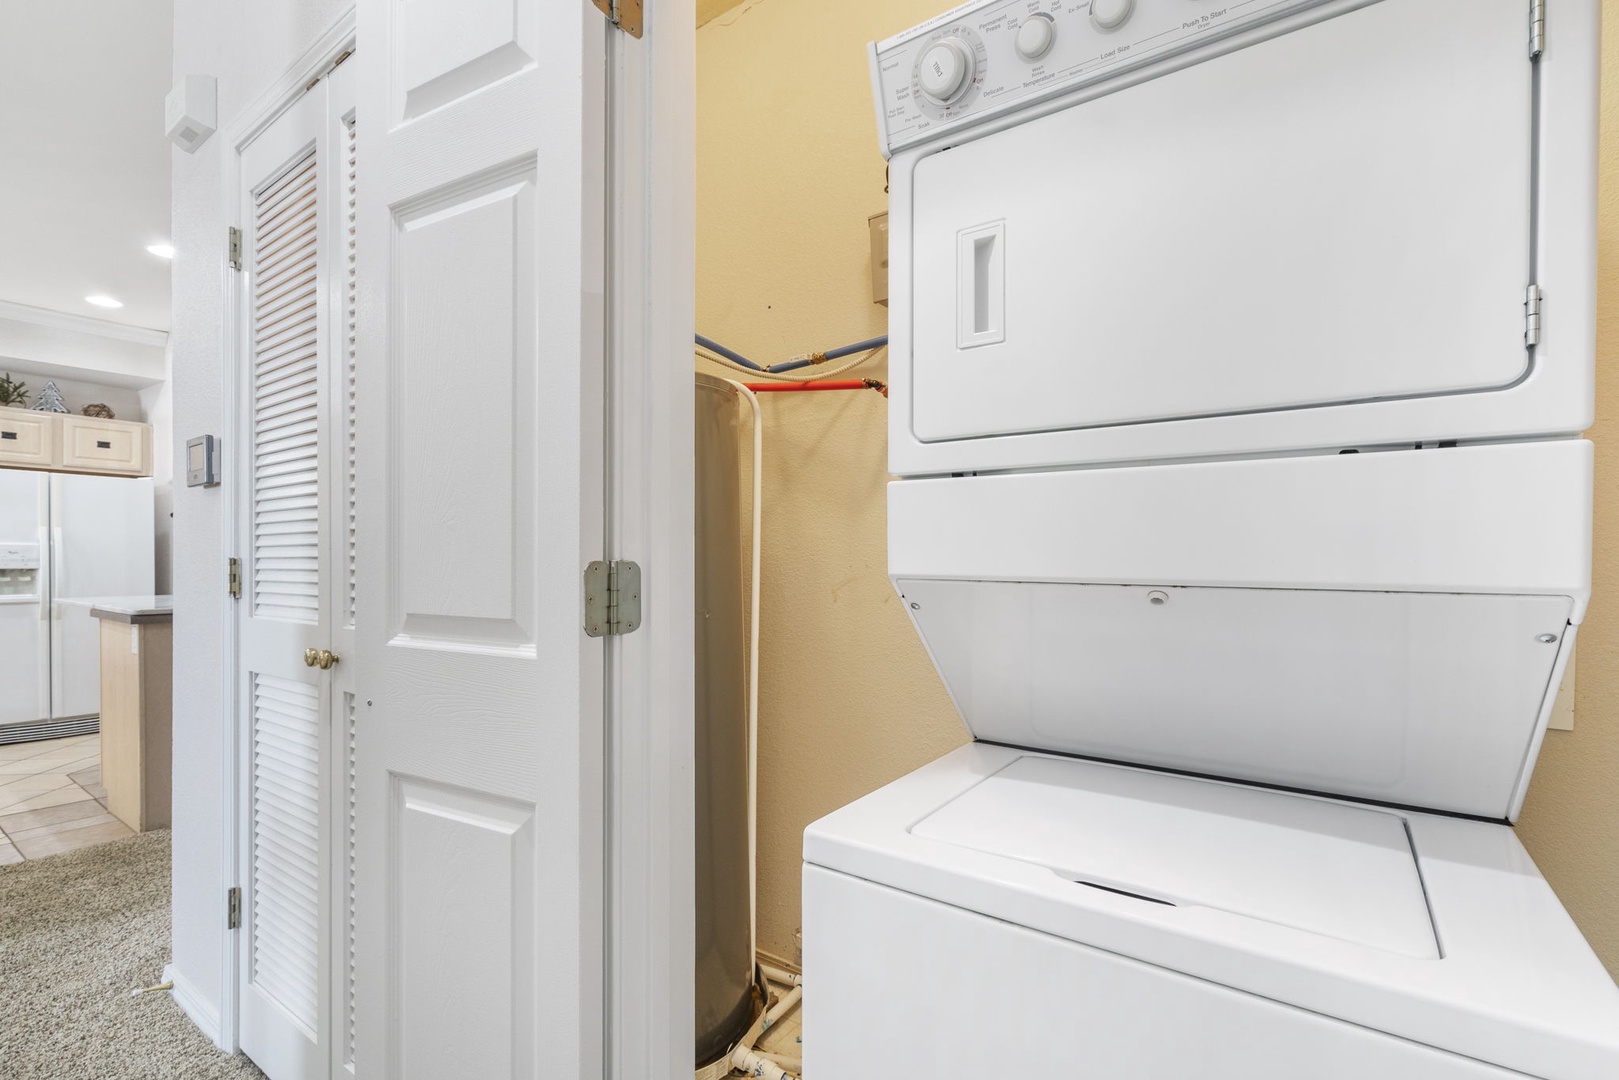 Private laundry is available for your stay, tucked away in a closet